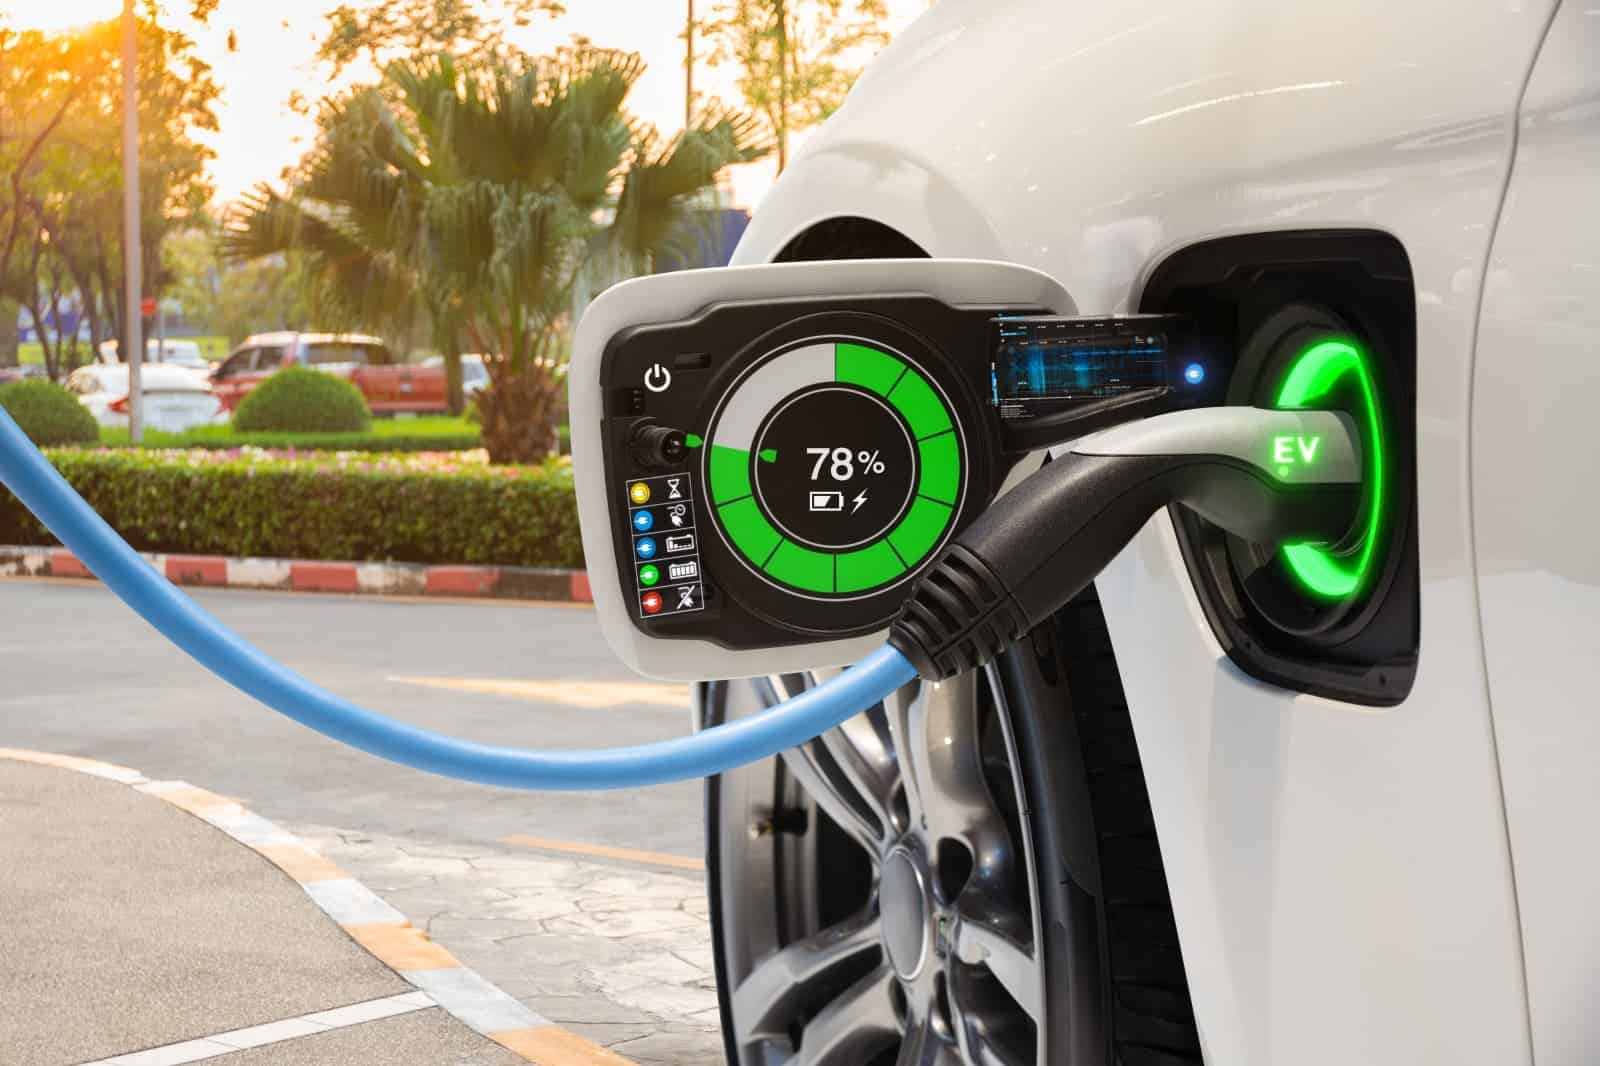 A US state plans to ban electric cars in 2035